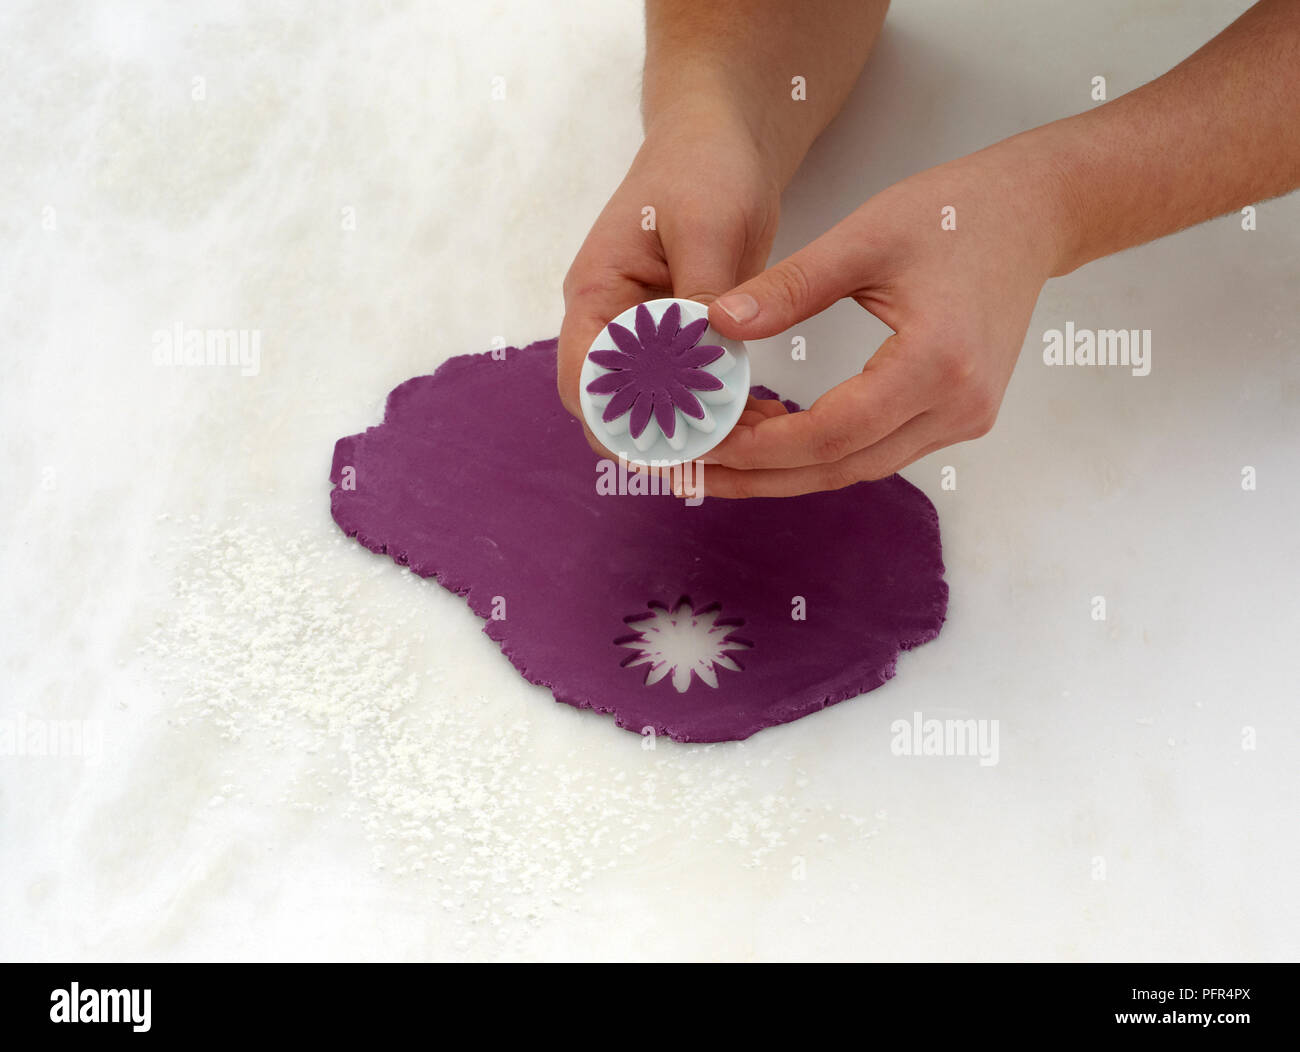 Cutting flower shape from purple fondant using plunger cutter, making cake decorations Stock Photo